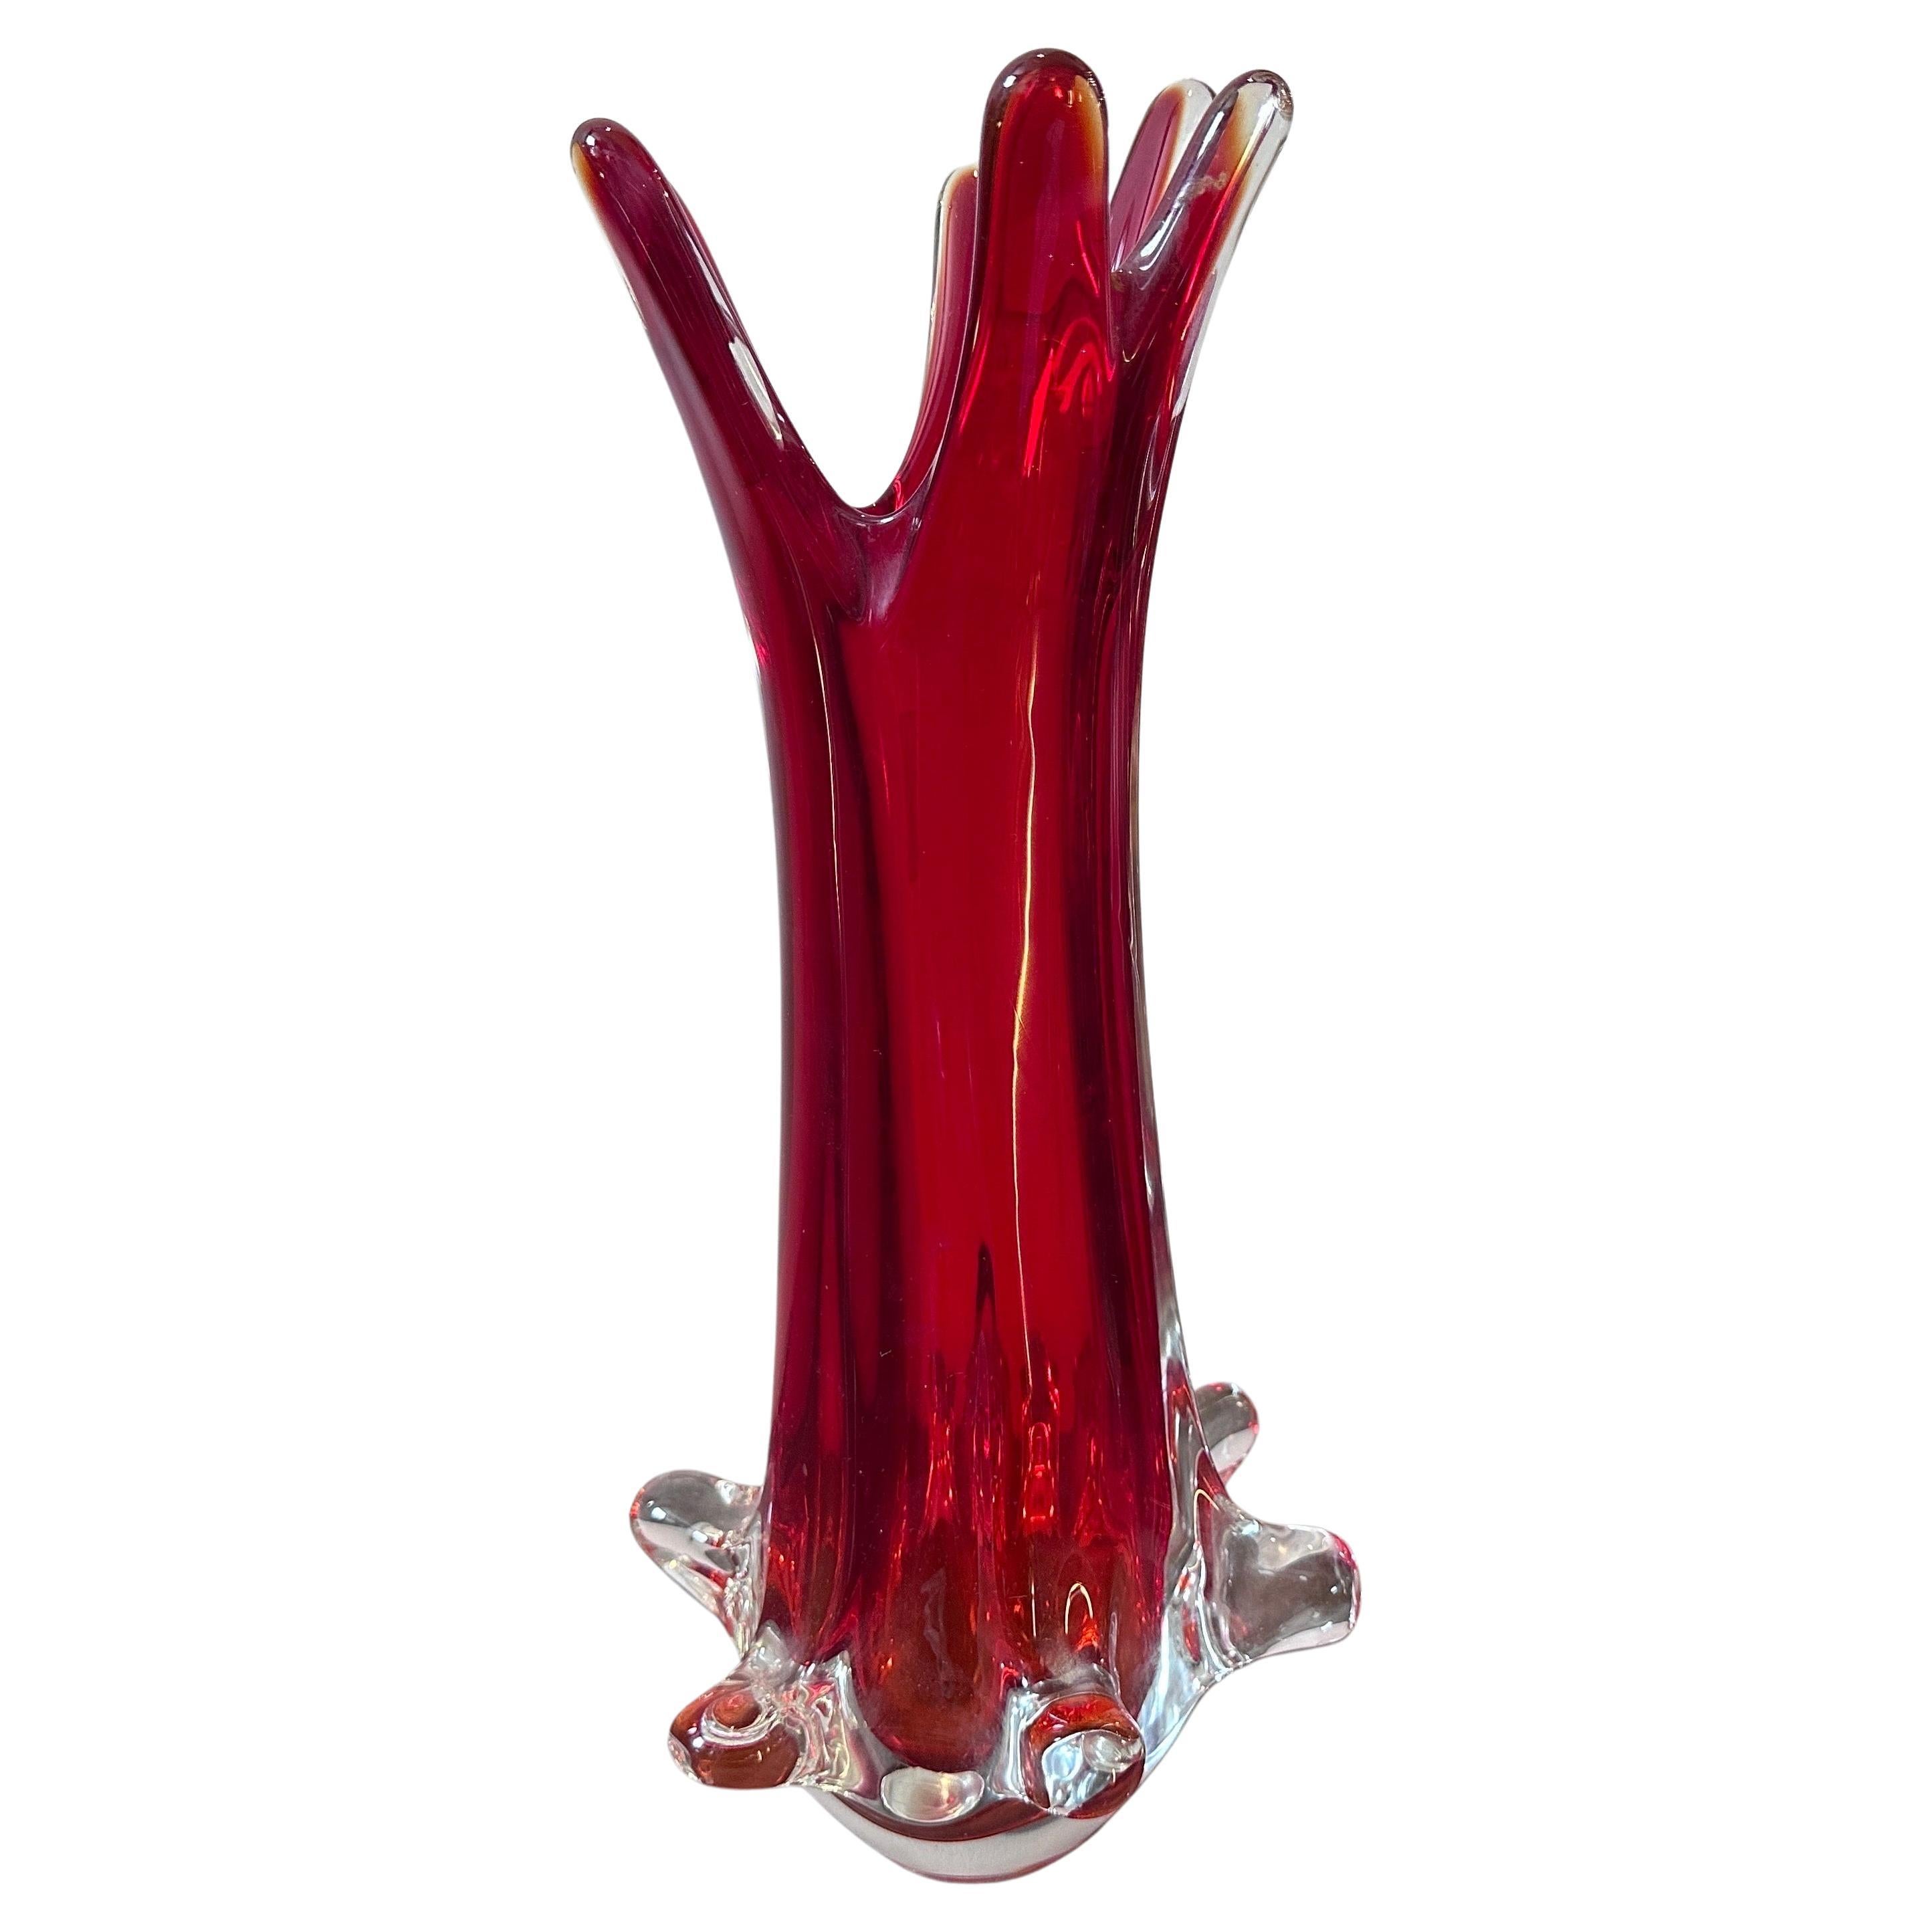 1980s Modernist Red Sommerso Murano Glass Tall Vase by Seguso For Sale